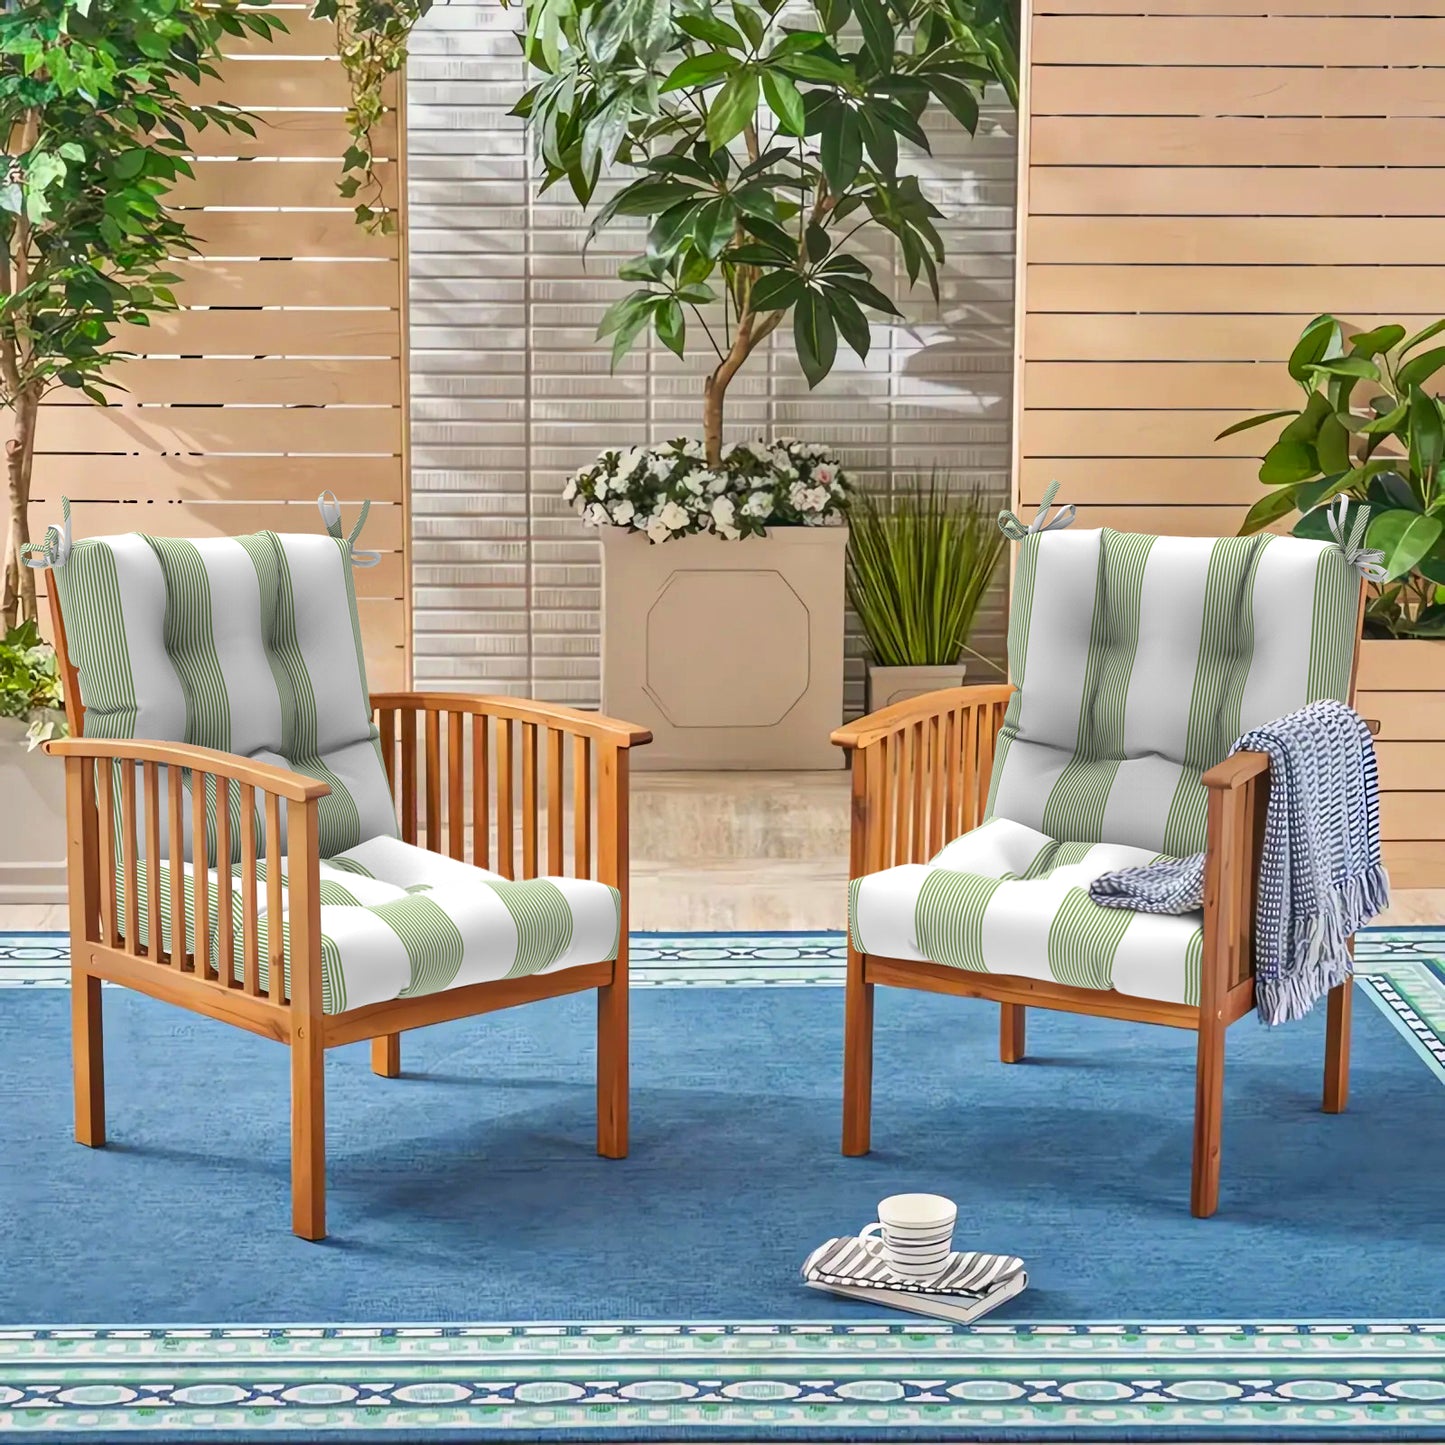 Melody Elephant Indoor/Outdoor Square Tufted Seat Cushions with Ties, Fade Resistant Patio Wicker Thick Chair Pads Pack of 2, 19 x 19 x 5 Inch, Stripe Cabana Green